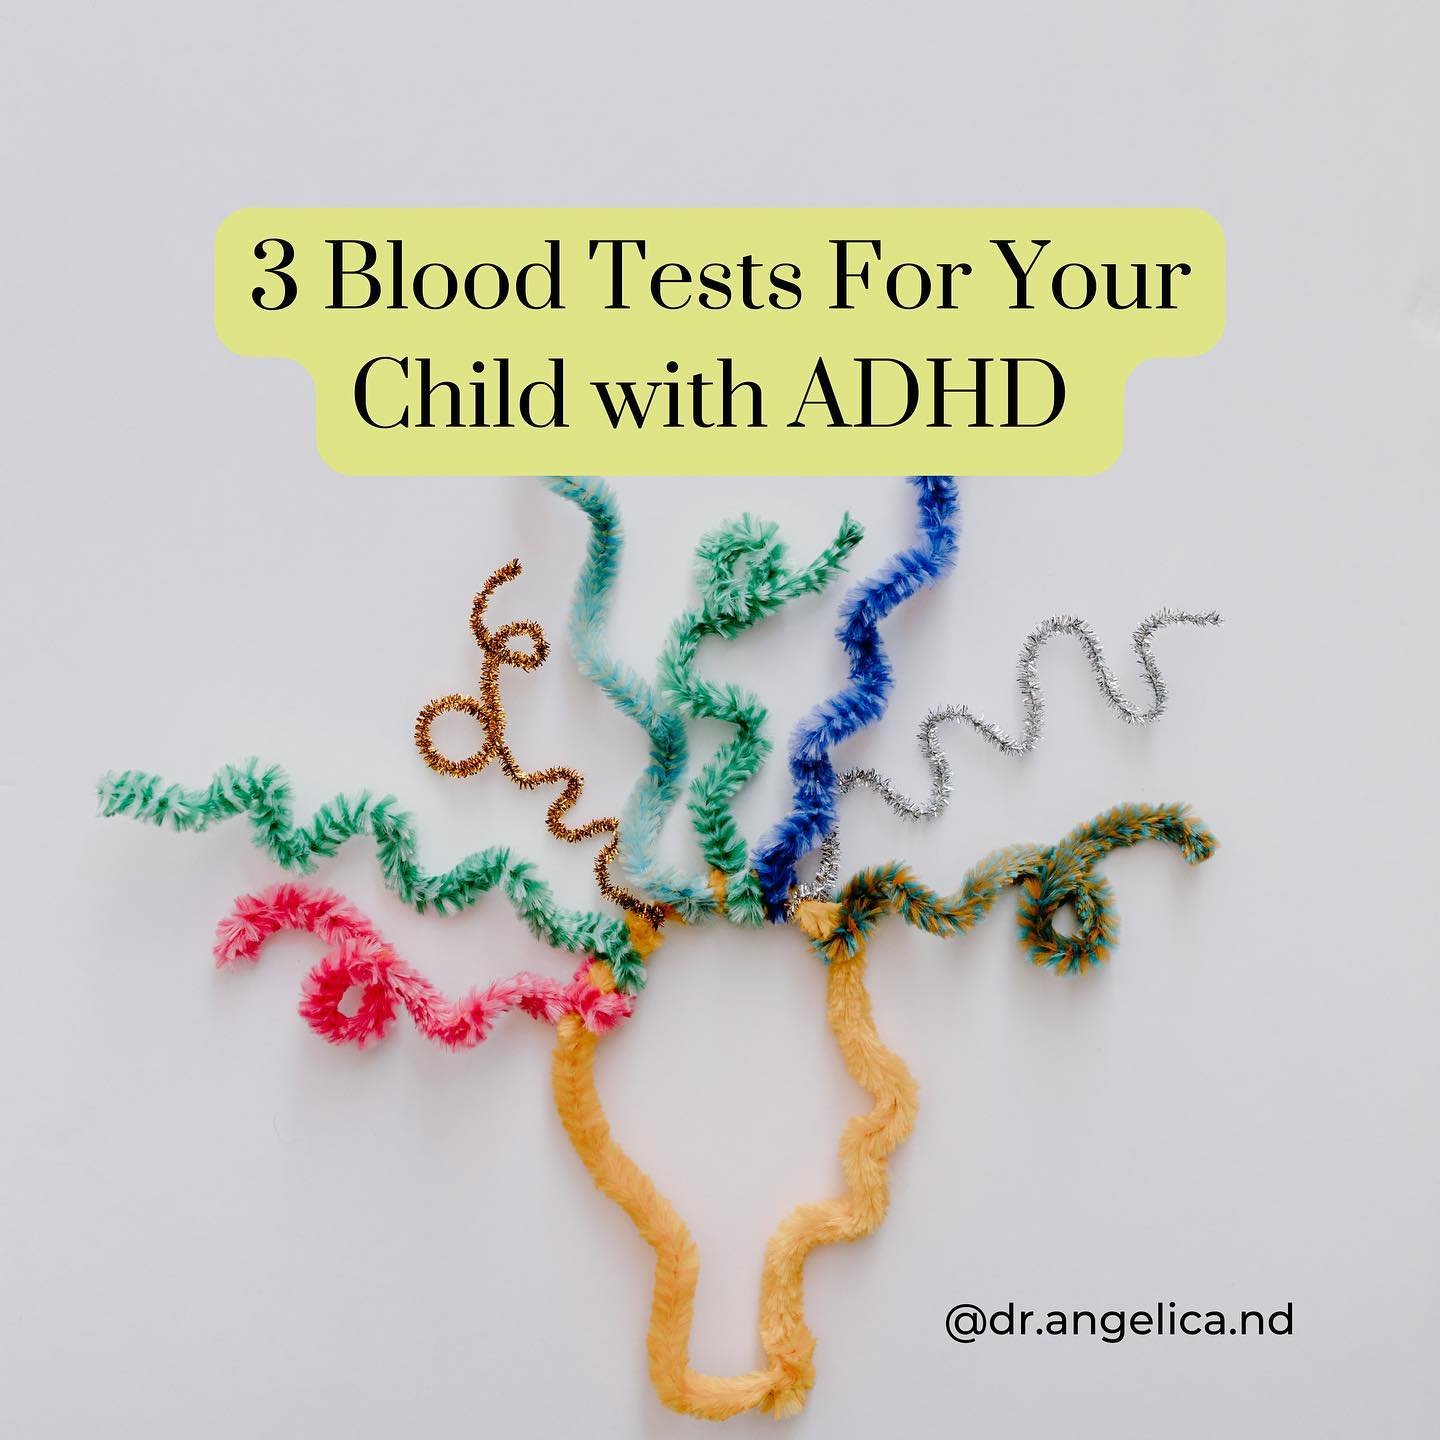 Blood tests can be super helpful for kids with ADHD! 🧠✨

Checking ferritin, vitamin D and TSH levels helps ensure they&rsquo;re getting the support they need for their overall health. 

Naturopathic Doctors can provide the requisitions you need to g